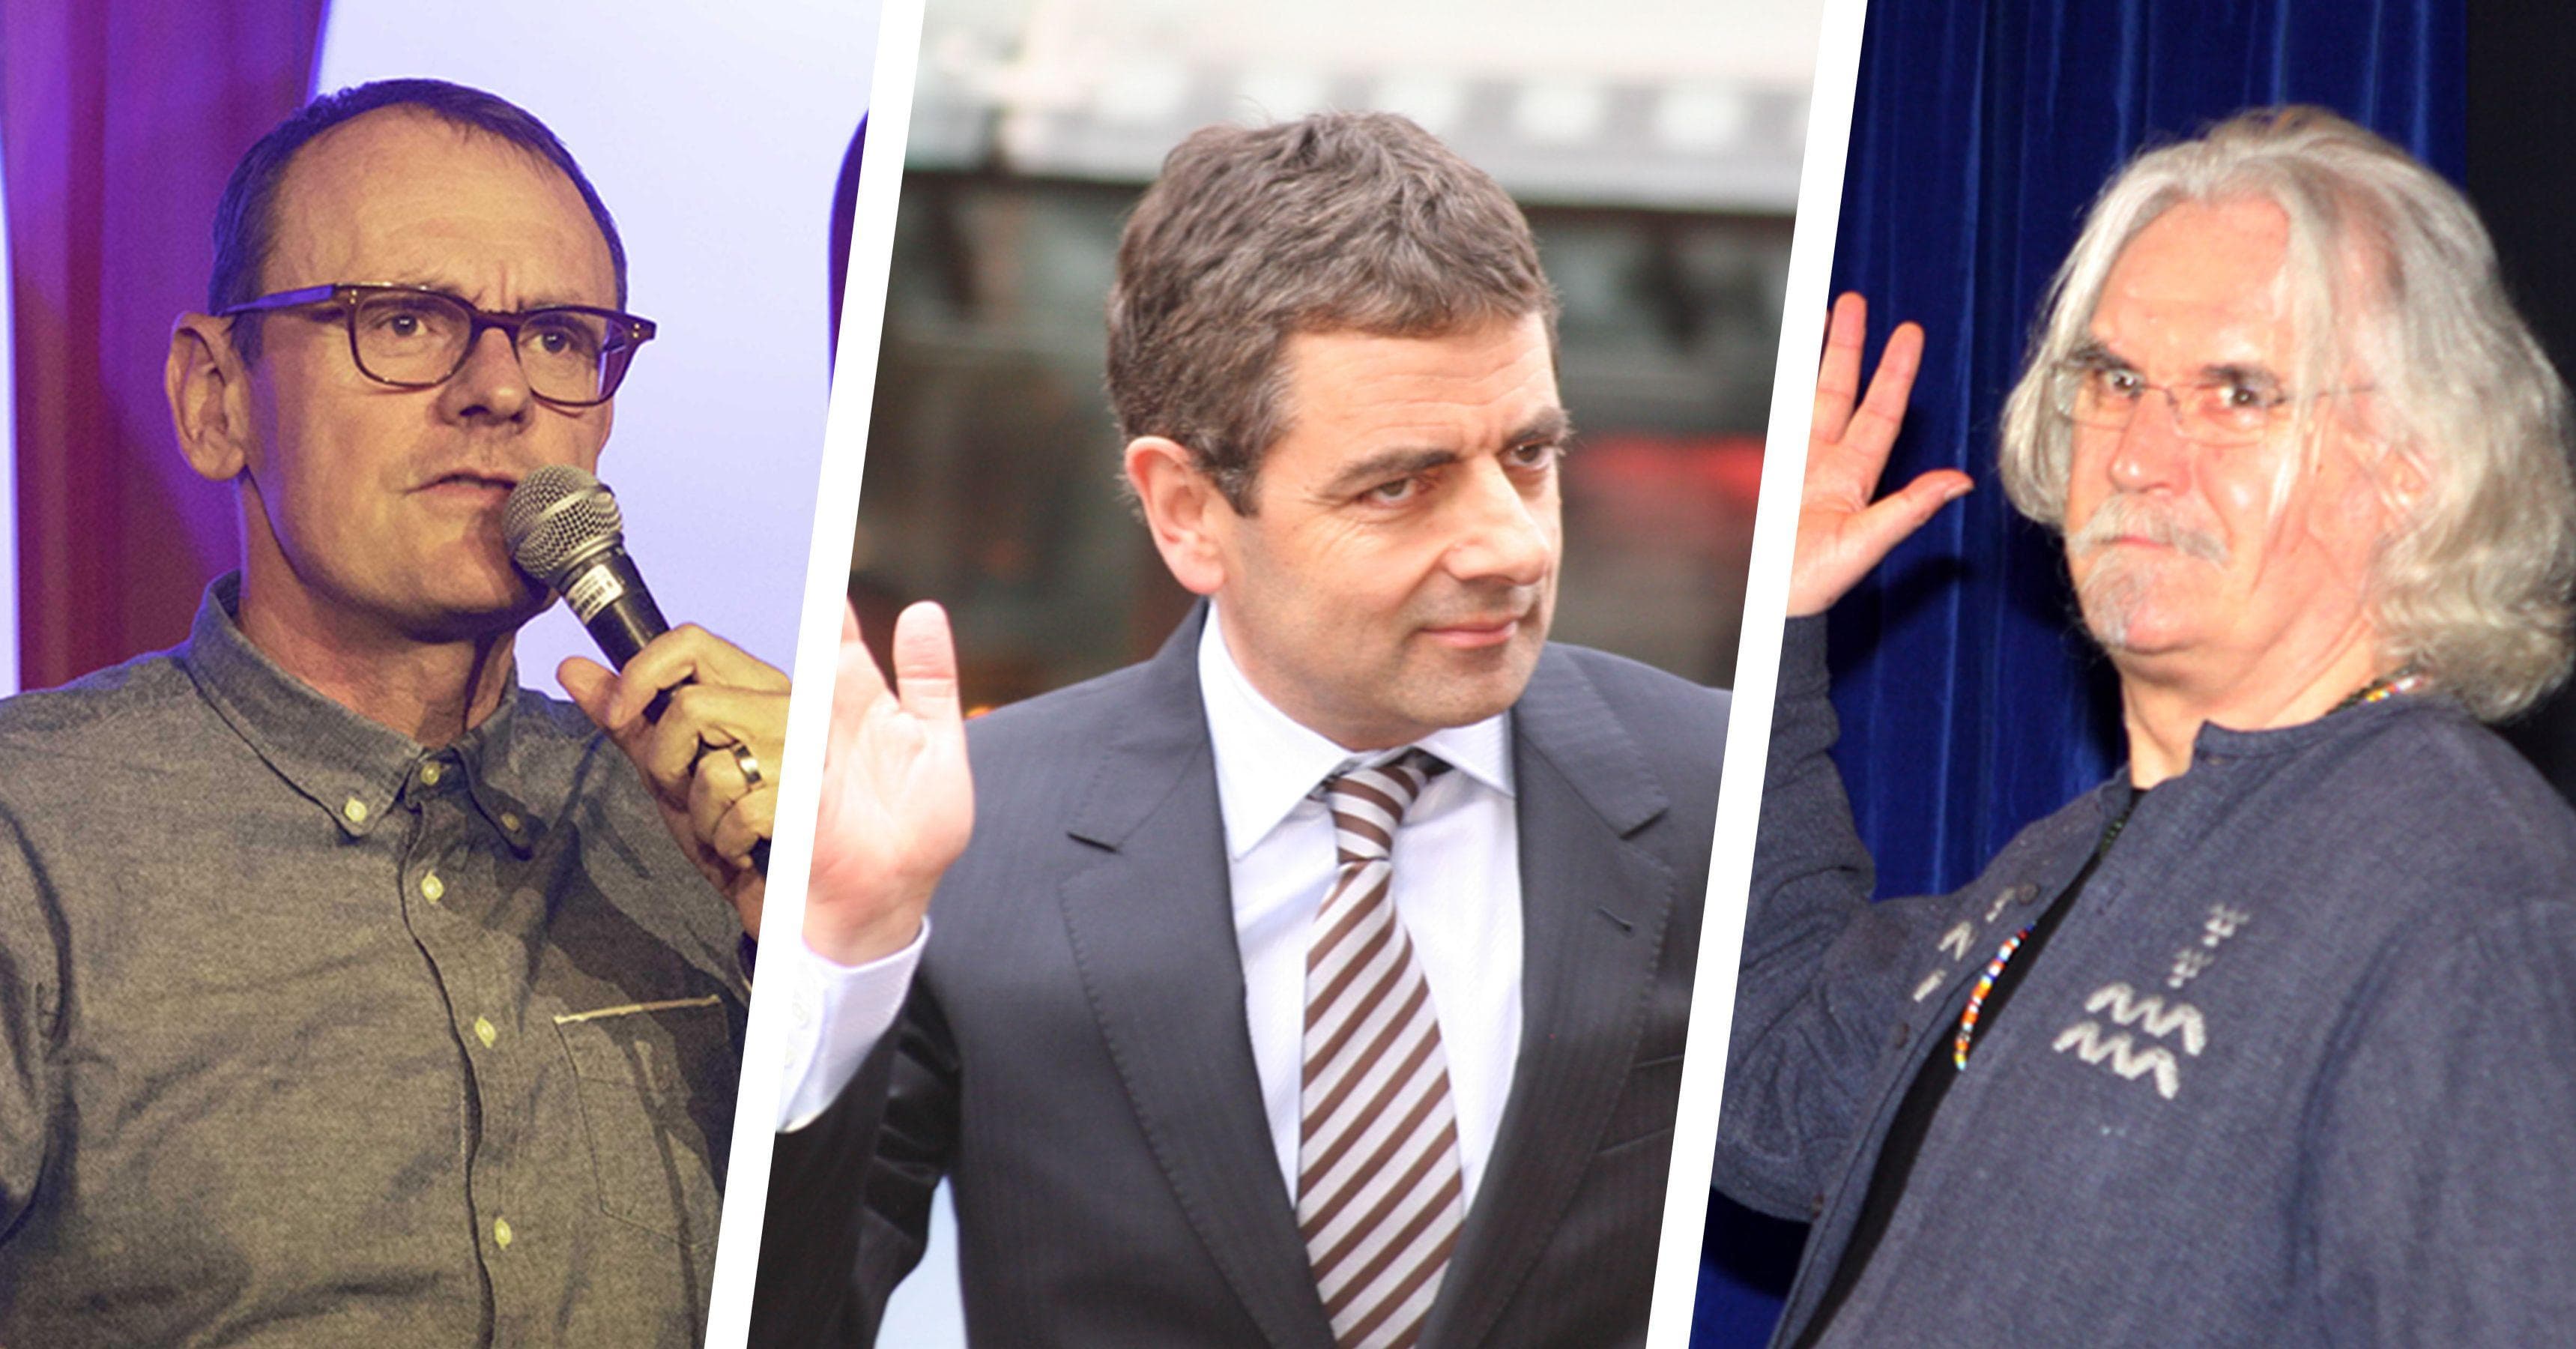 The Best British And Irish Comedians Of All Time Ranked